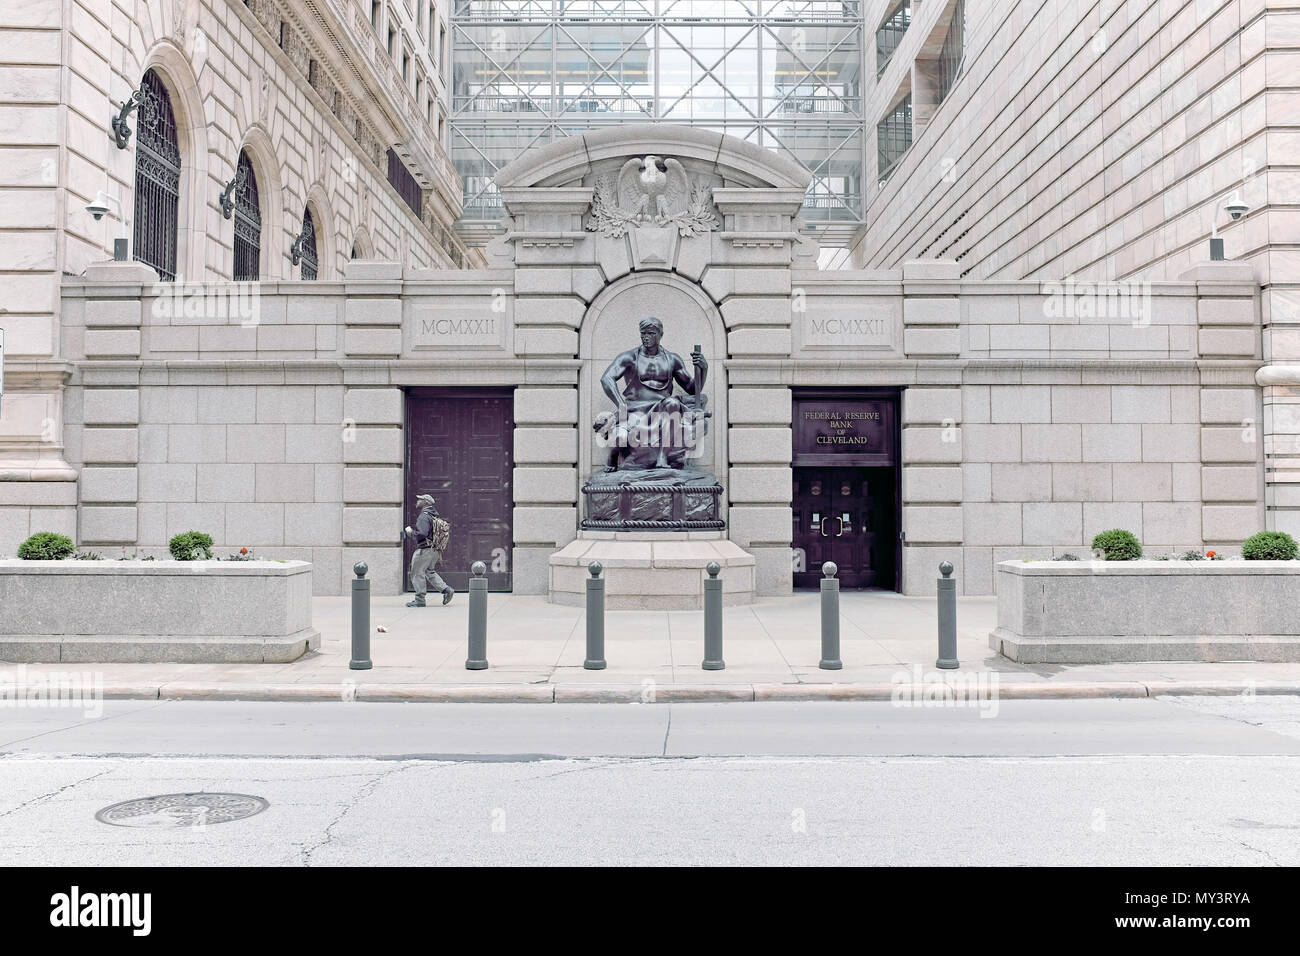 A man walks past the Federal Reserve Bank of Cleveland in downtown Cleveland, Ohio, USA. Stock Photo